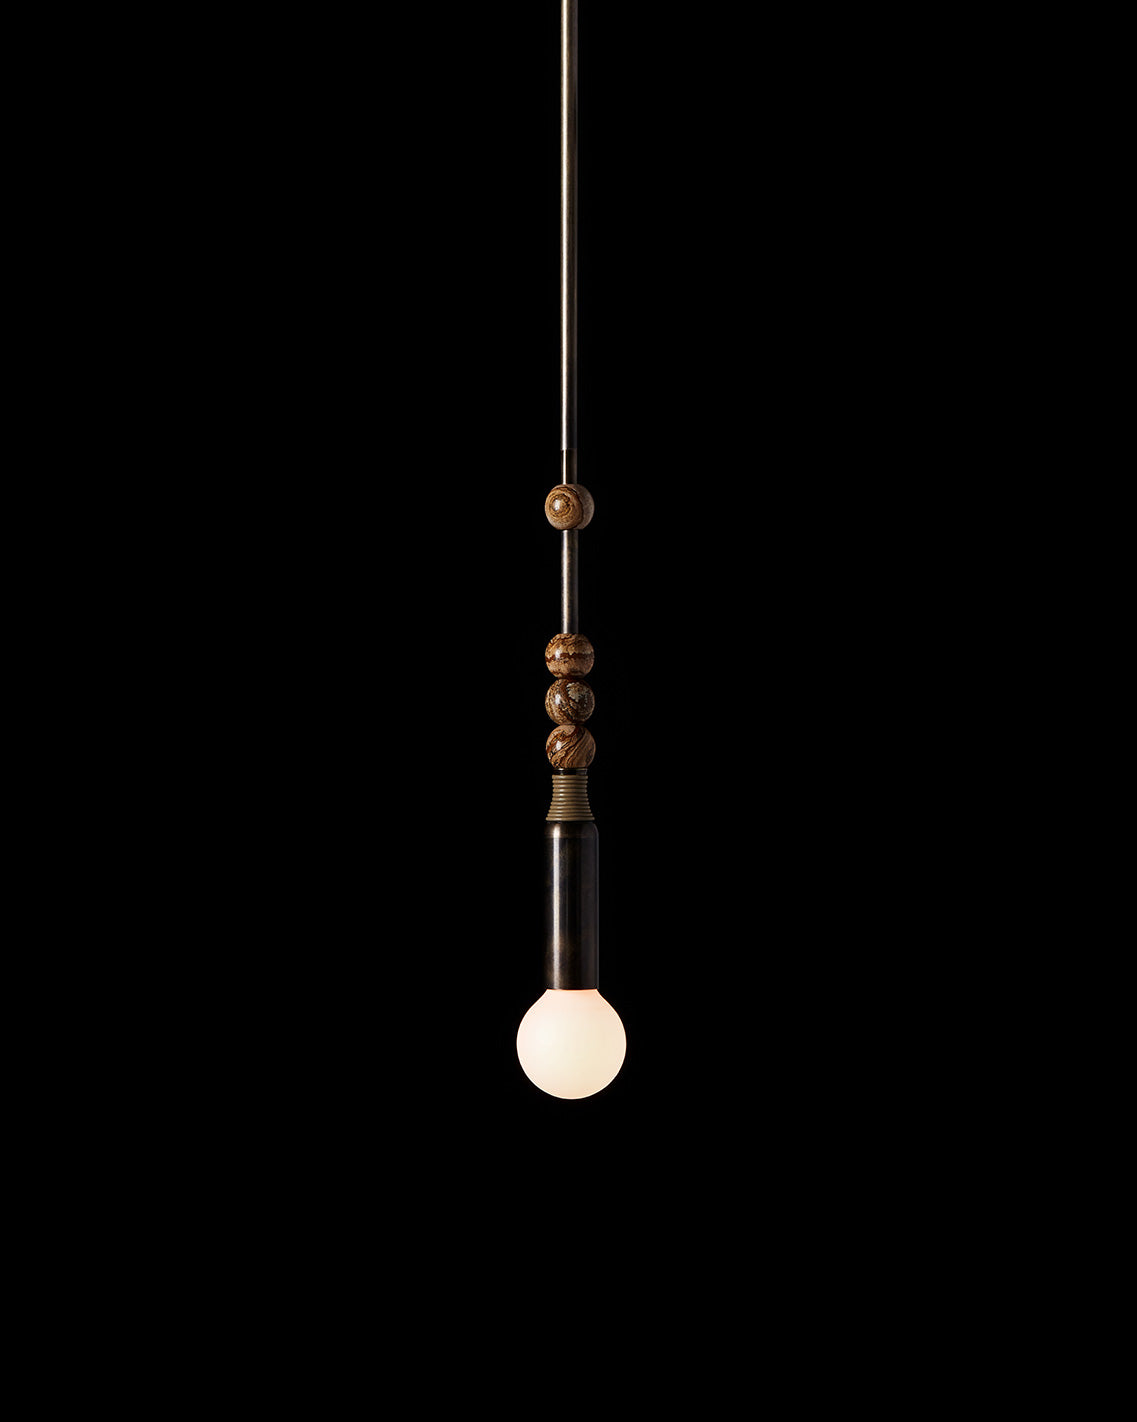 An illuminated TALISMAN : 1 ceiling pendant hanging against a black background. 